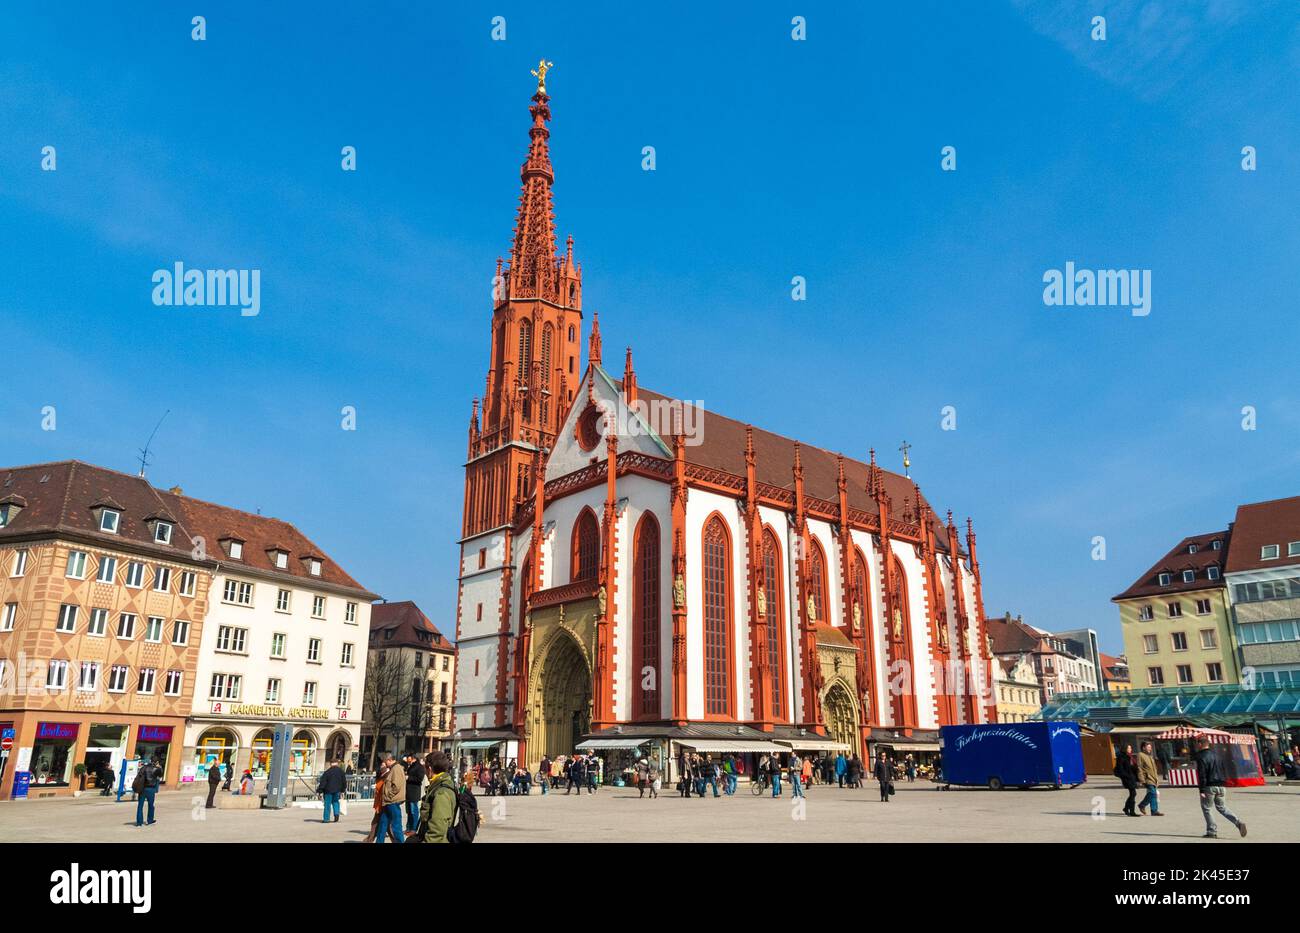 Picturesque view of the famous Roman Catholic church Marienkapelle built in the Gothic style in the market square Unterer Markt of Würzburg, Germany,... Stock Photo